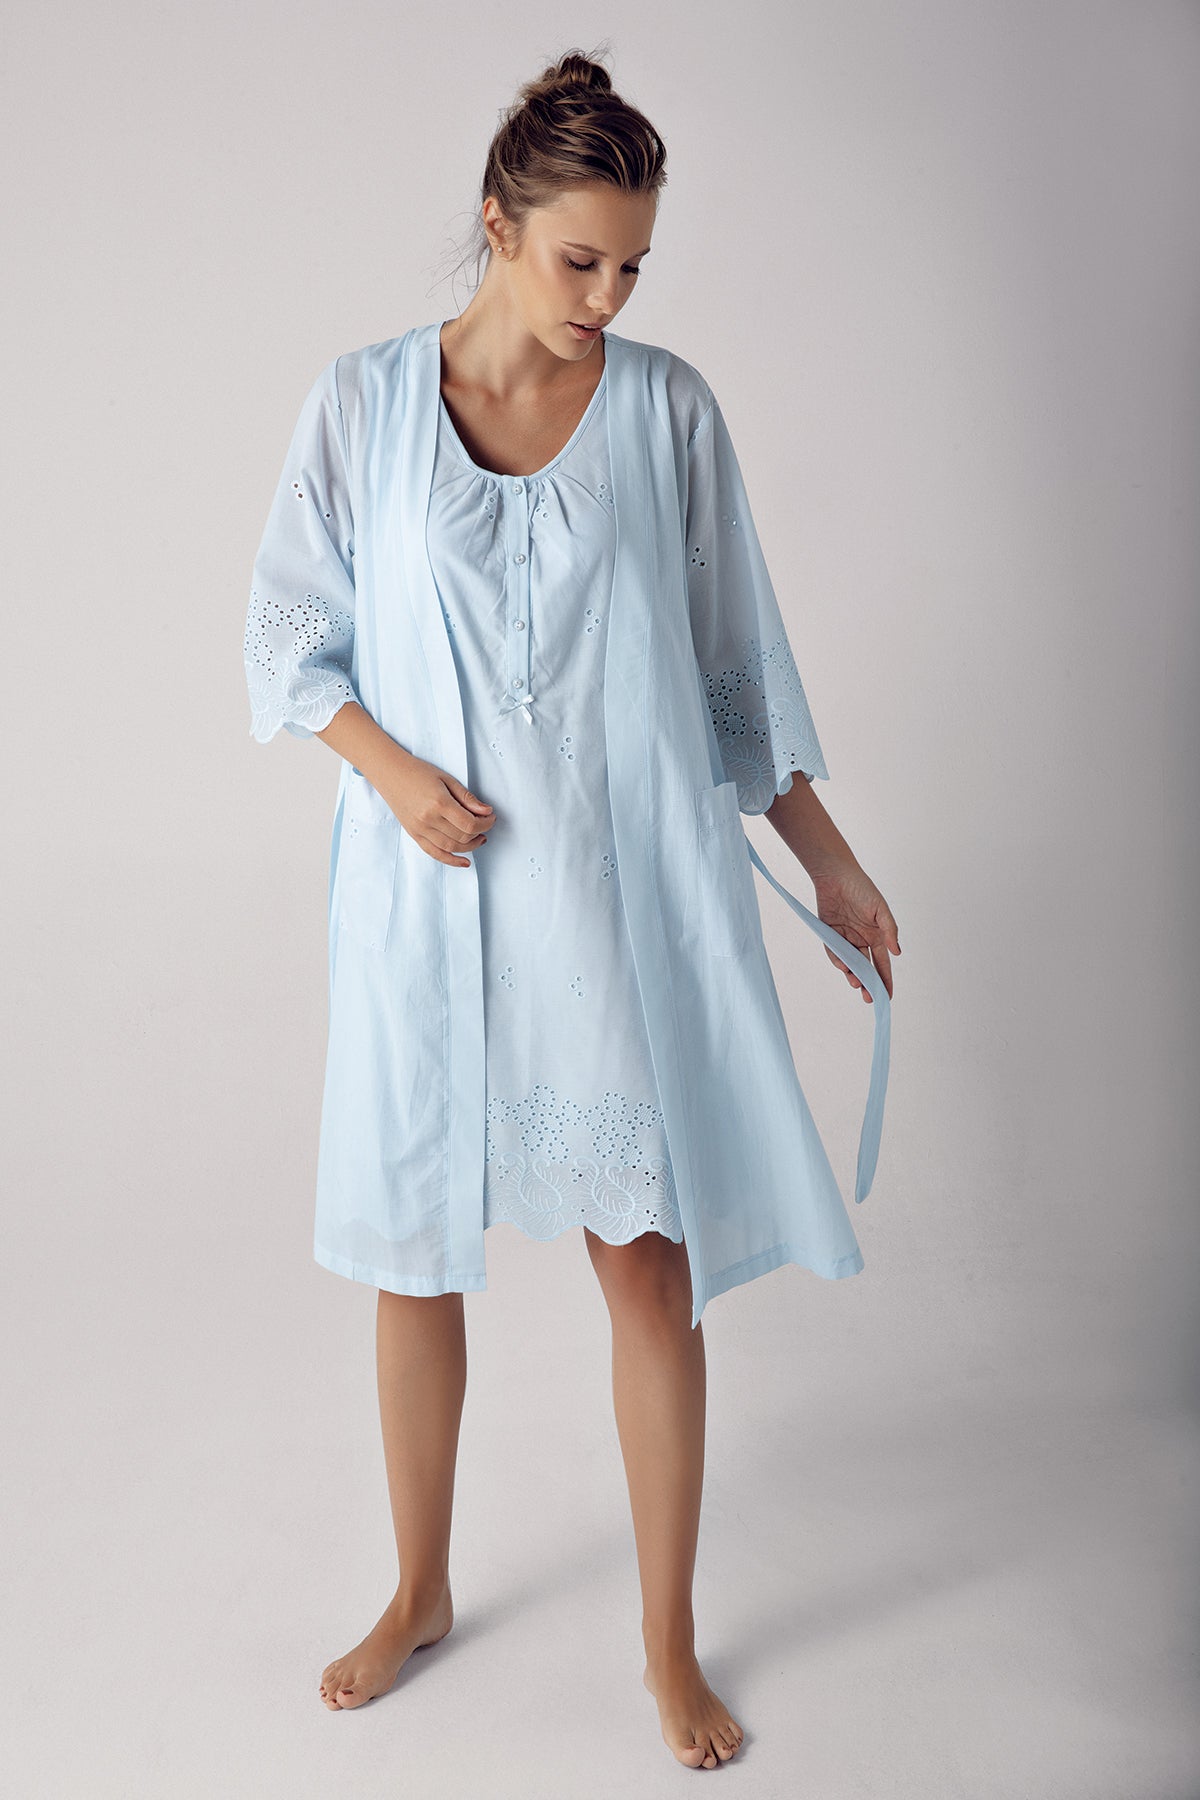 Shopymommy 10402 Cotton Weaving Maternity & Nursing Nightgown With Robe Blue